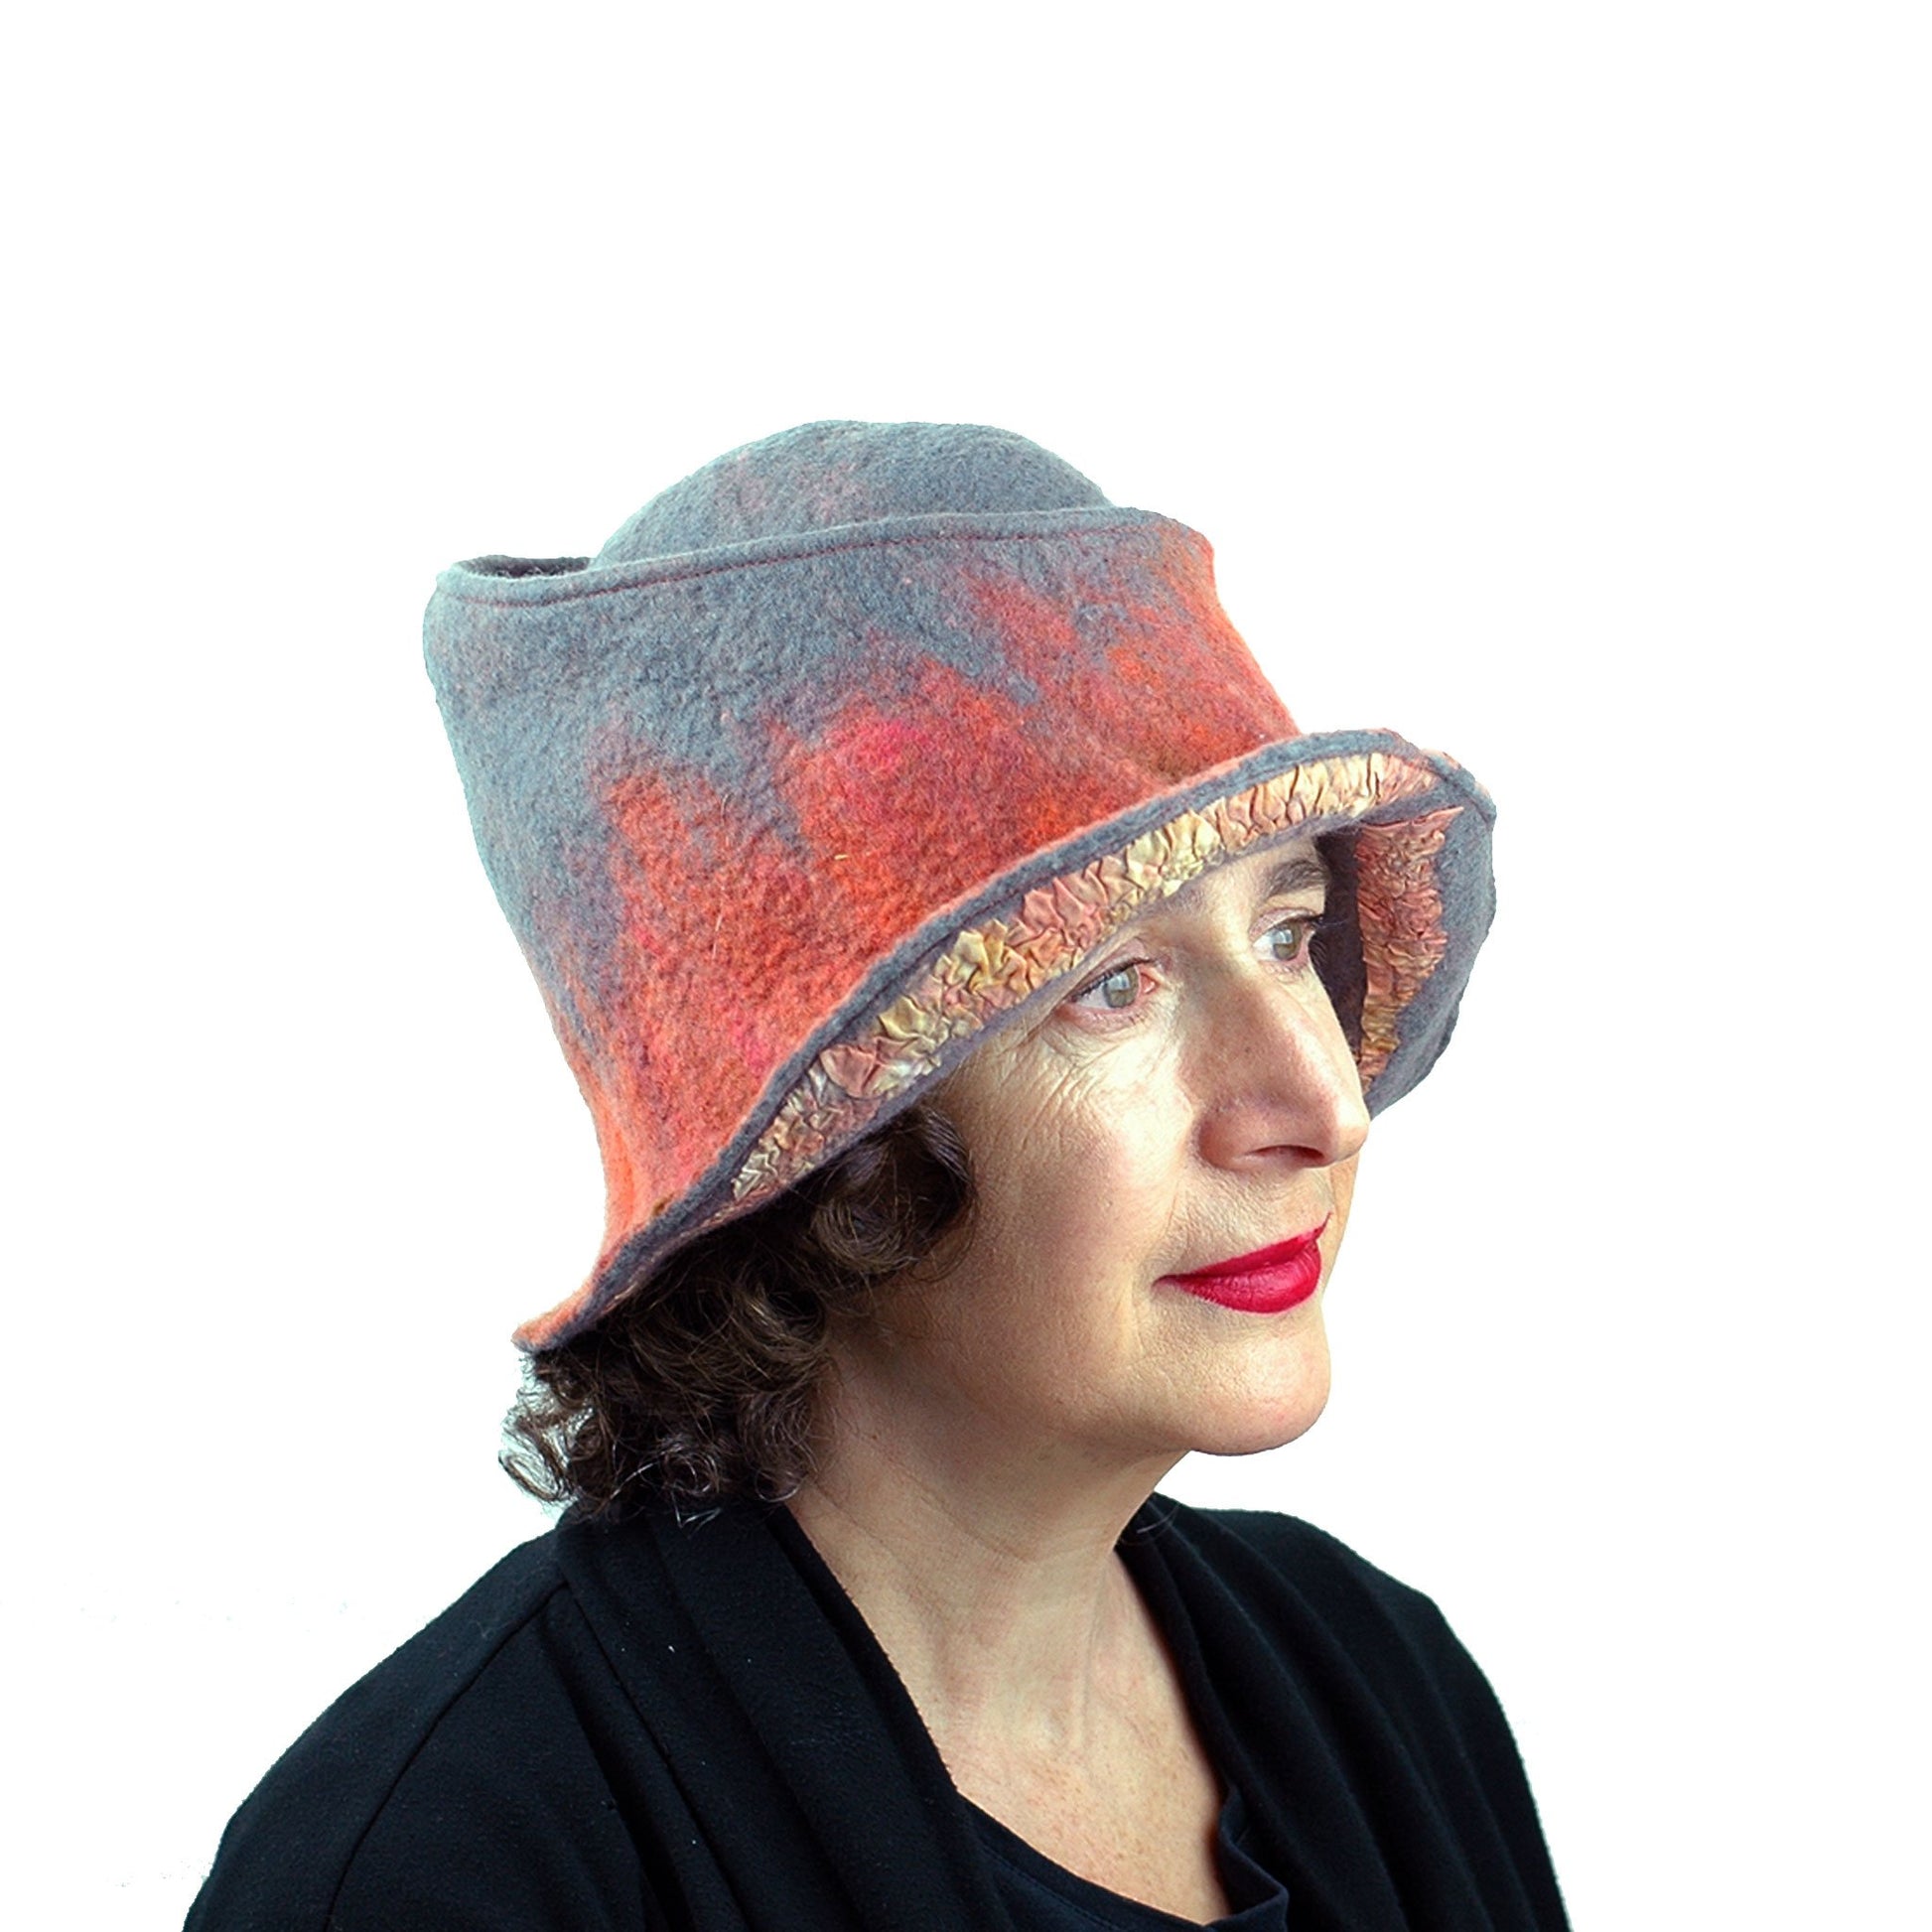 Coral and Gray Felted Hat with Nunofelt - threequarters view